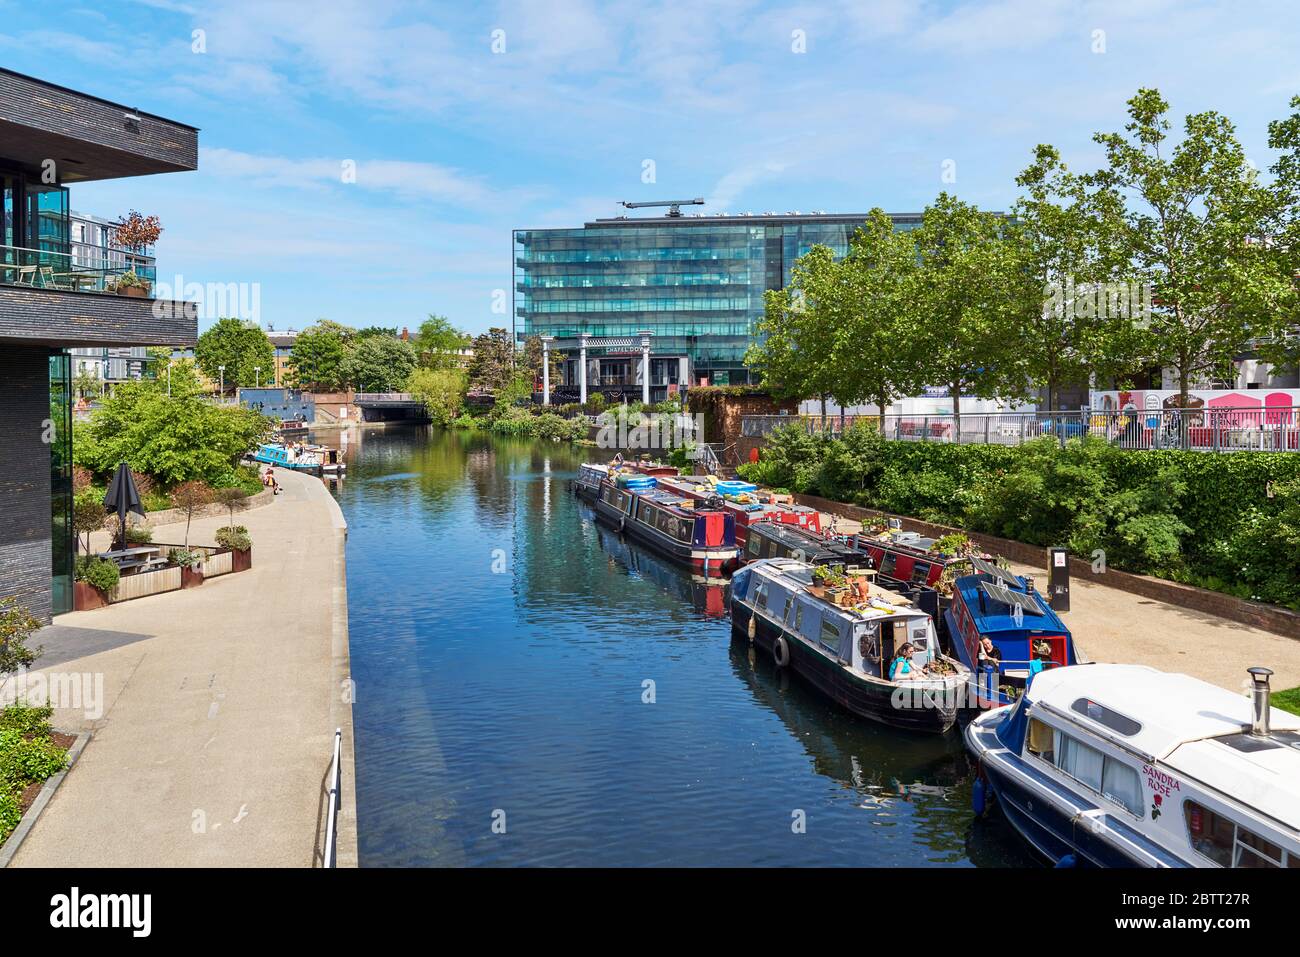 The Regent's Canal from Coal Drops Yard, King's Cross, London UK Stock Photo